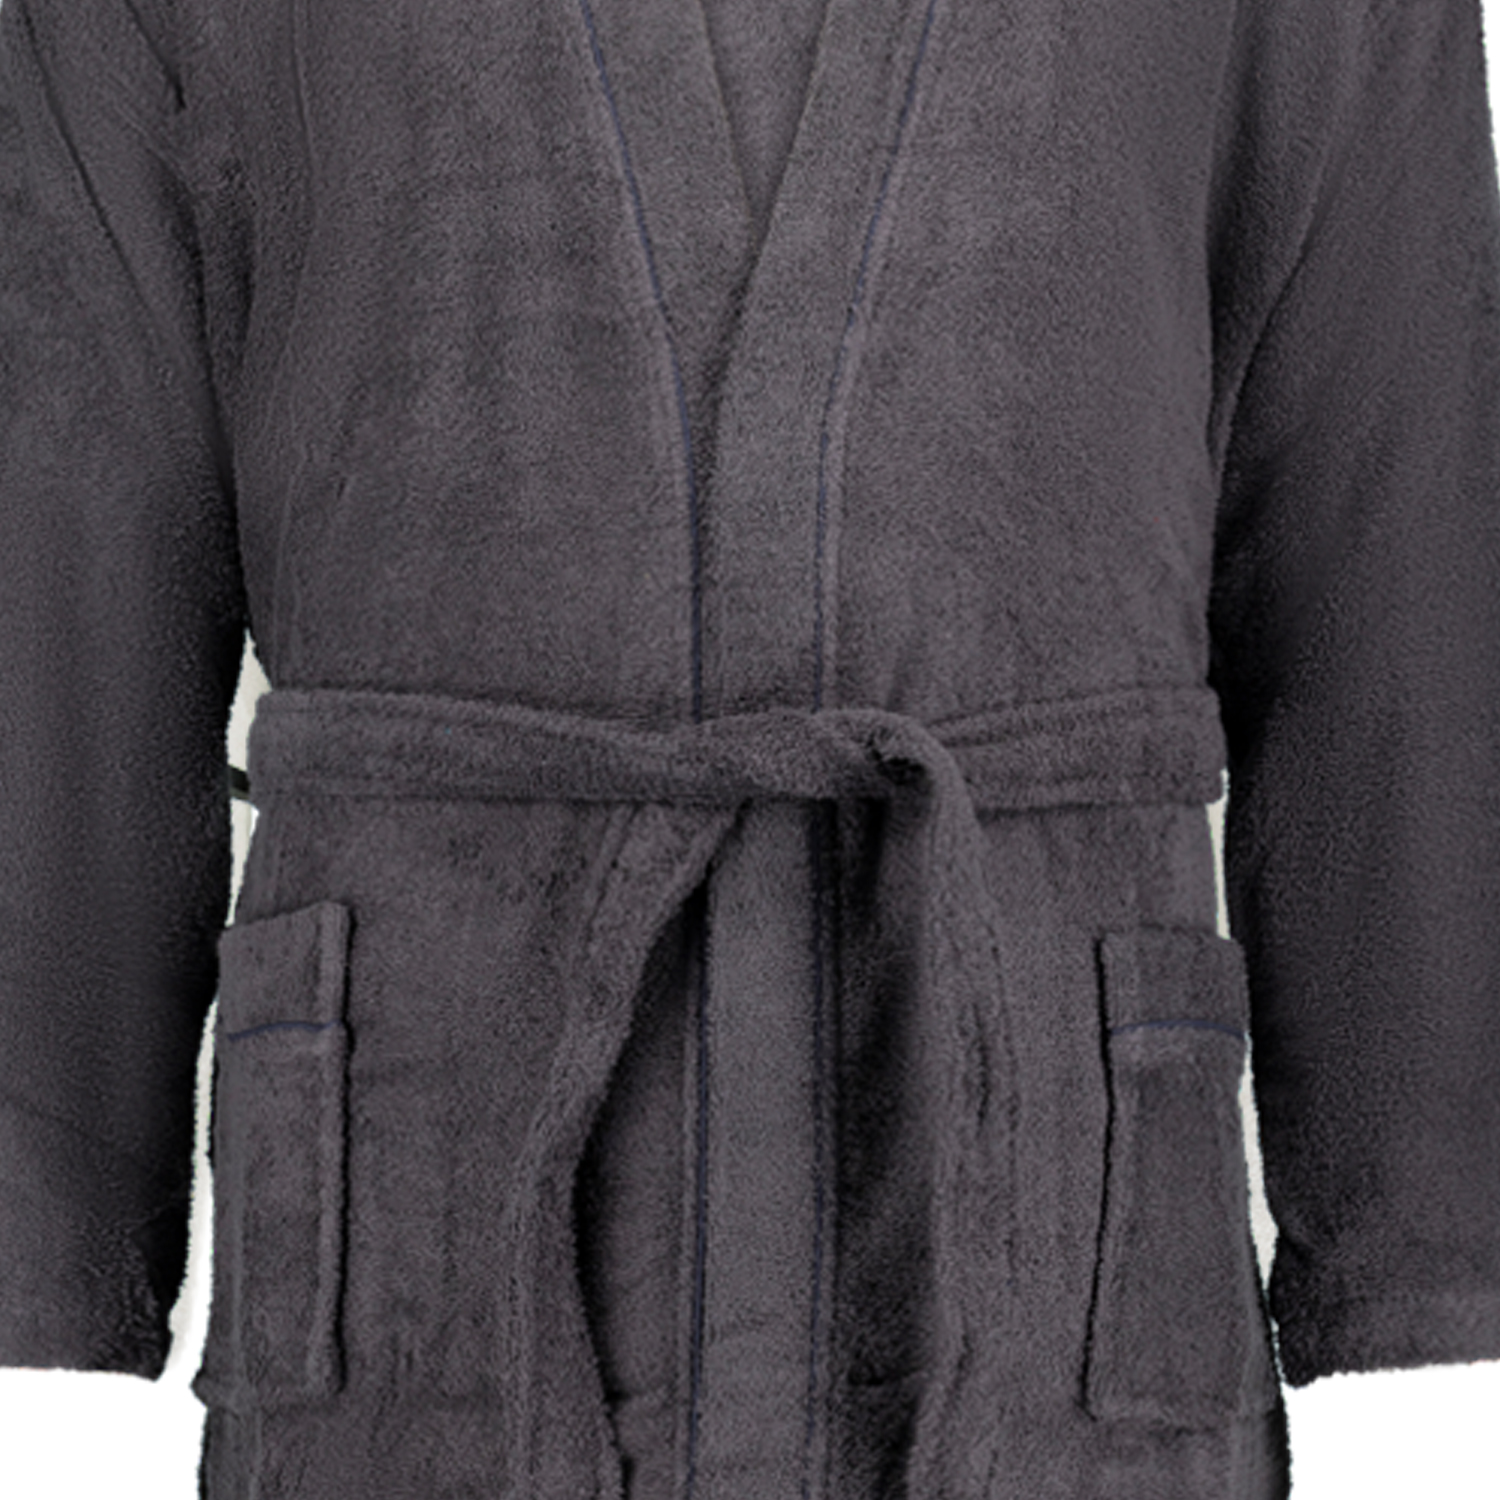 Bathrobe for men in anthracite by ADAMO series "Joey" in oversizes up to 12XL